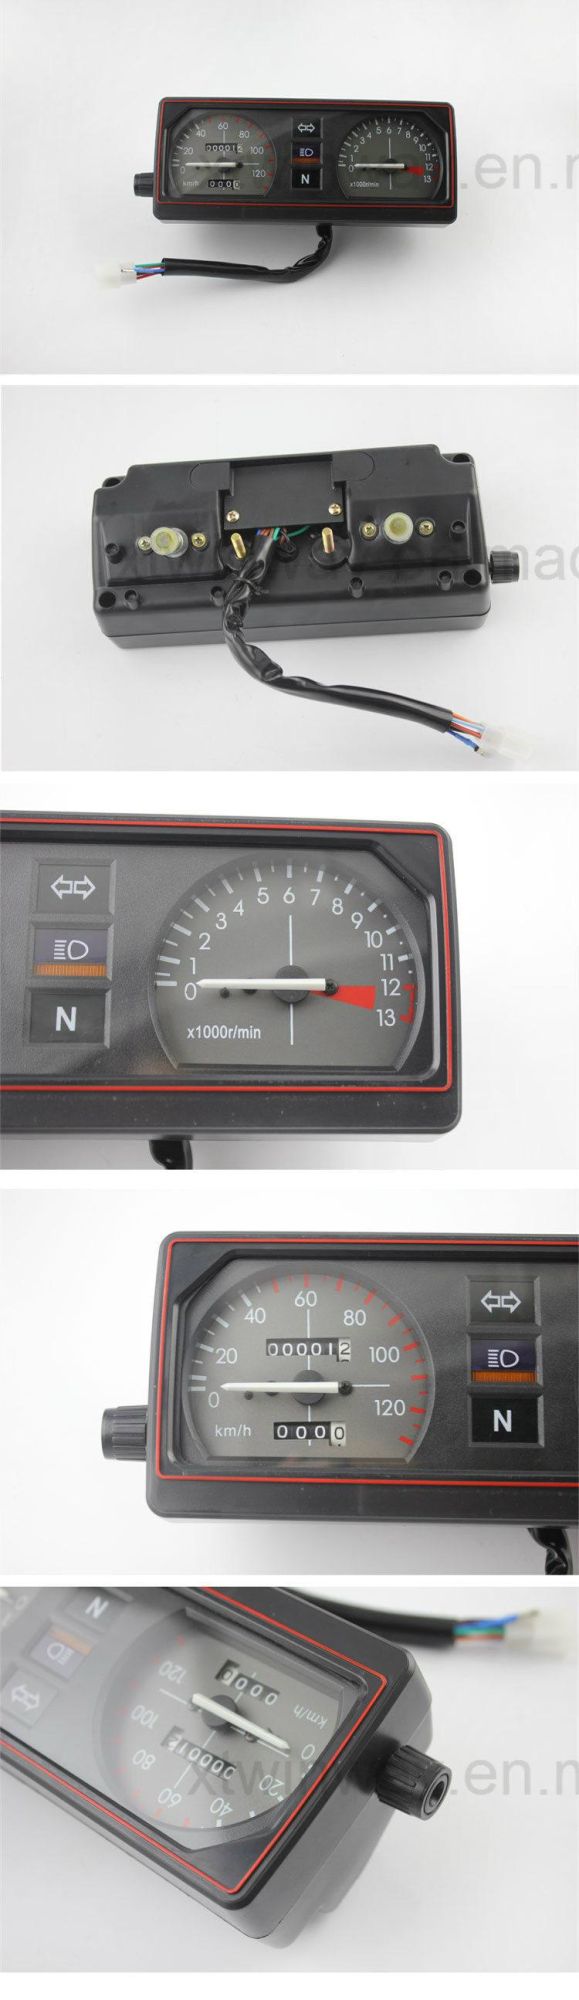 Ww-3015 Cbt125/Dy150-4 Tachometer Instrument Speedometer Motorcycle Parts